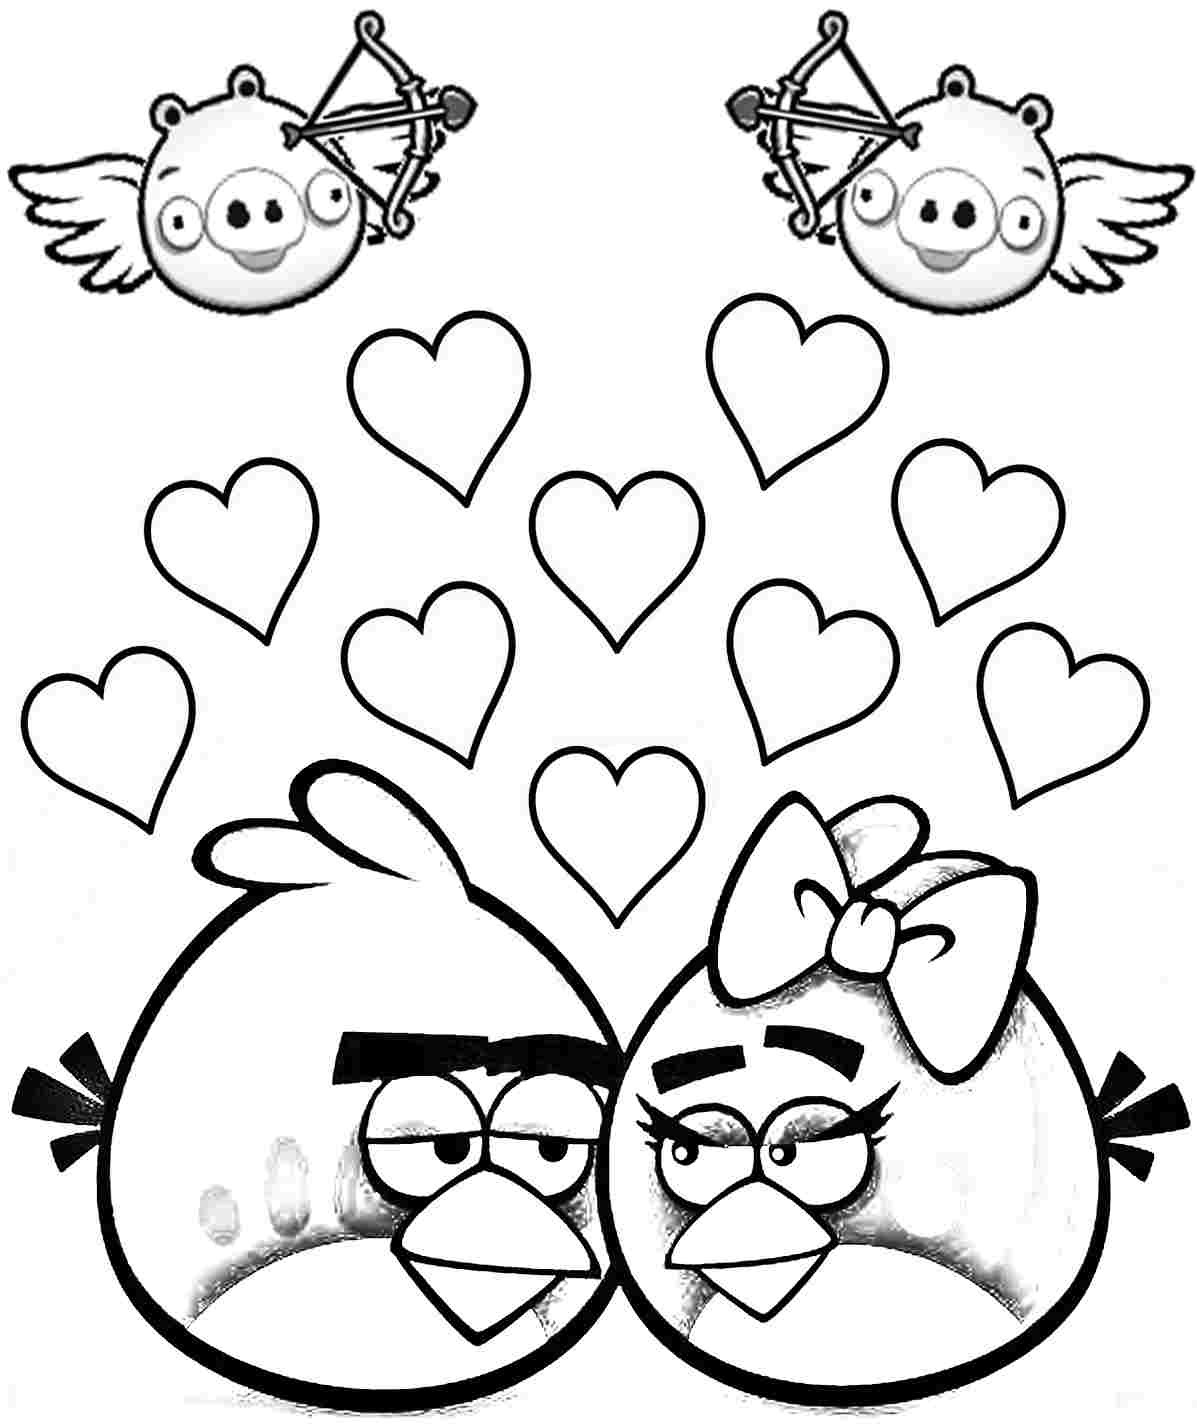 Valentine Coloring Sheets For Boys
 valentines coloring pages for boys